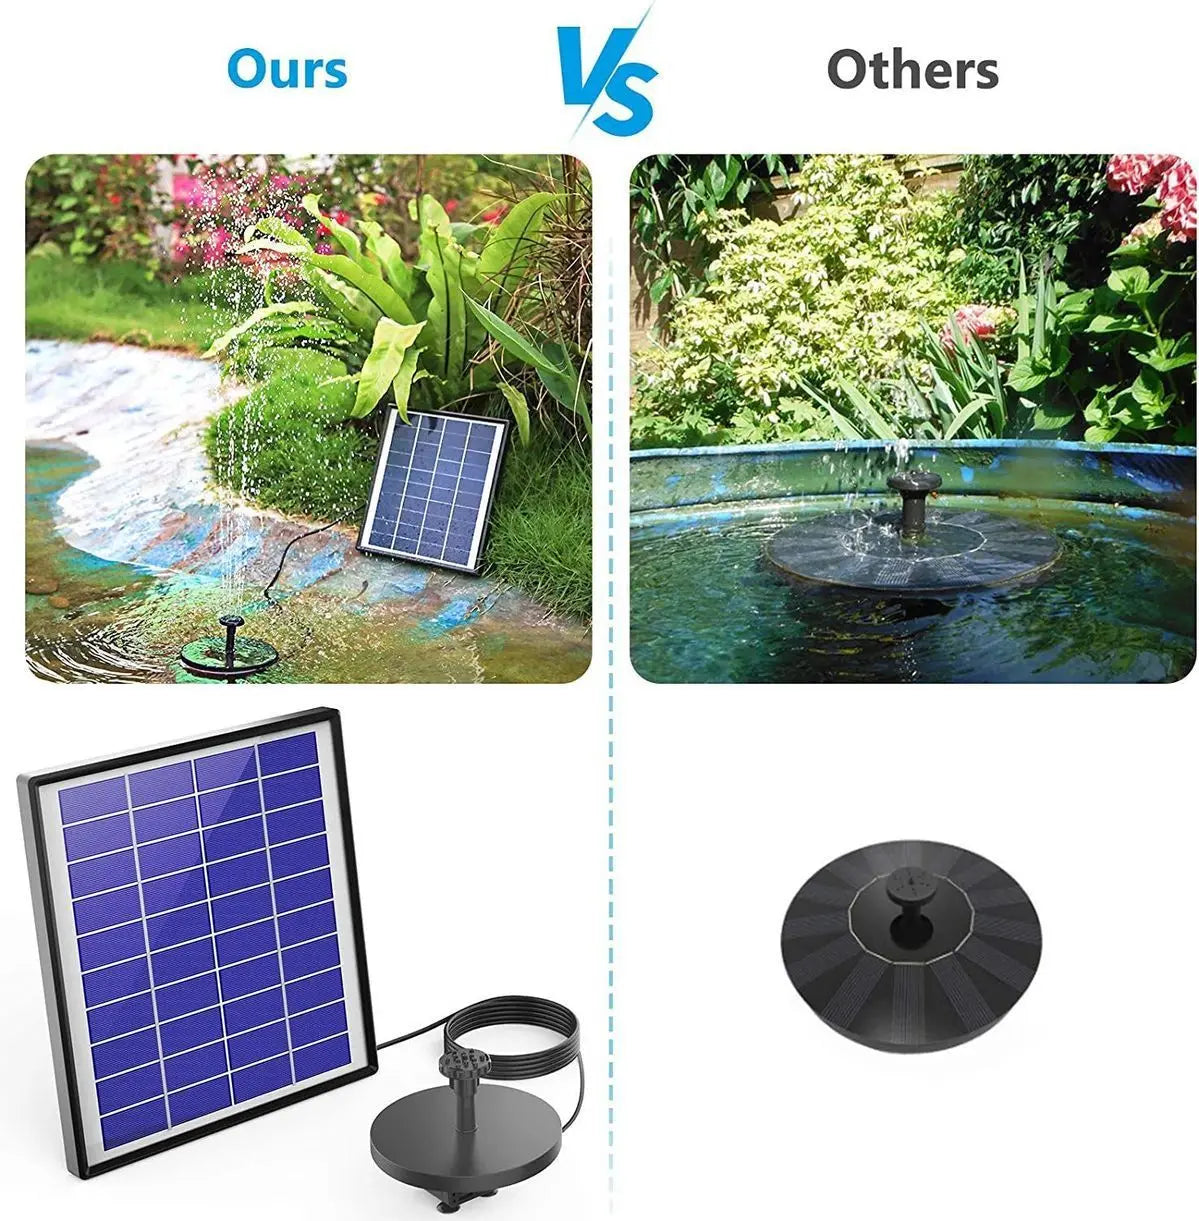 12V Solar Panel Charging Water Pump Set, Compact solar-powered pump for submersible use in rockeries, fish ponds, and fountains, ideal for small gardens.